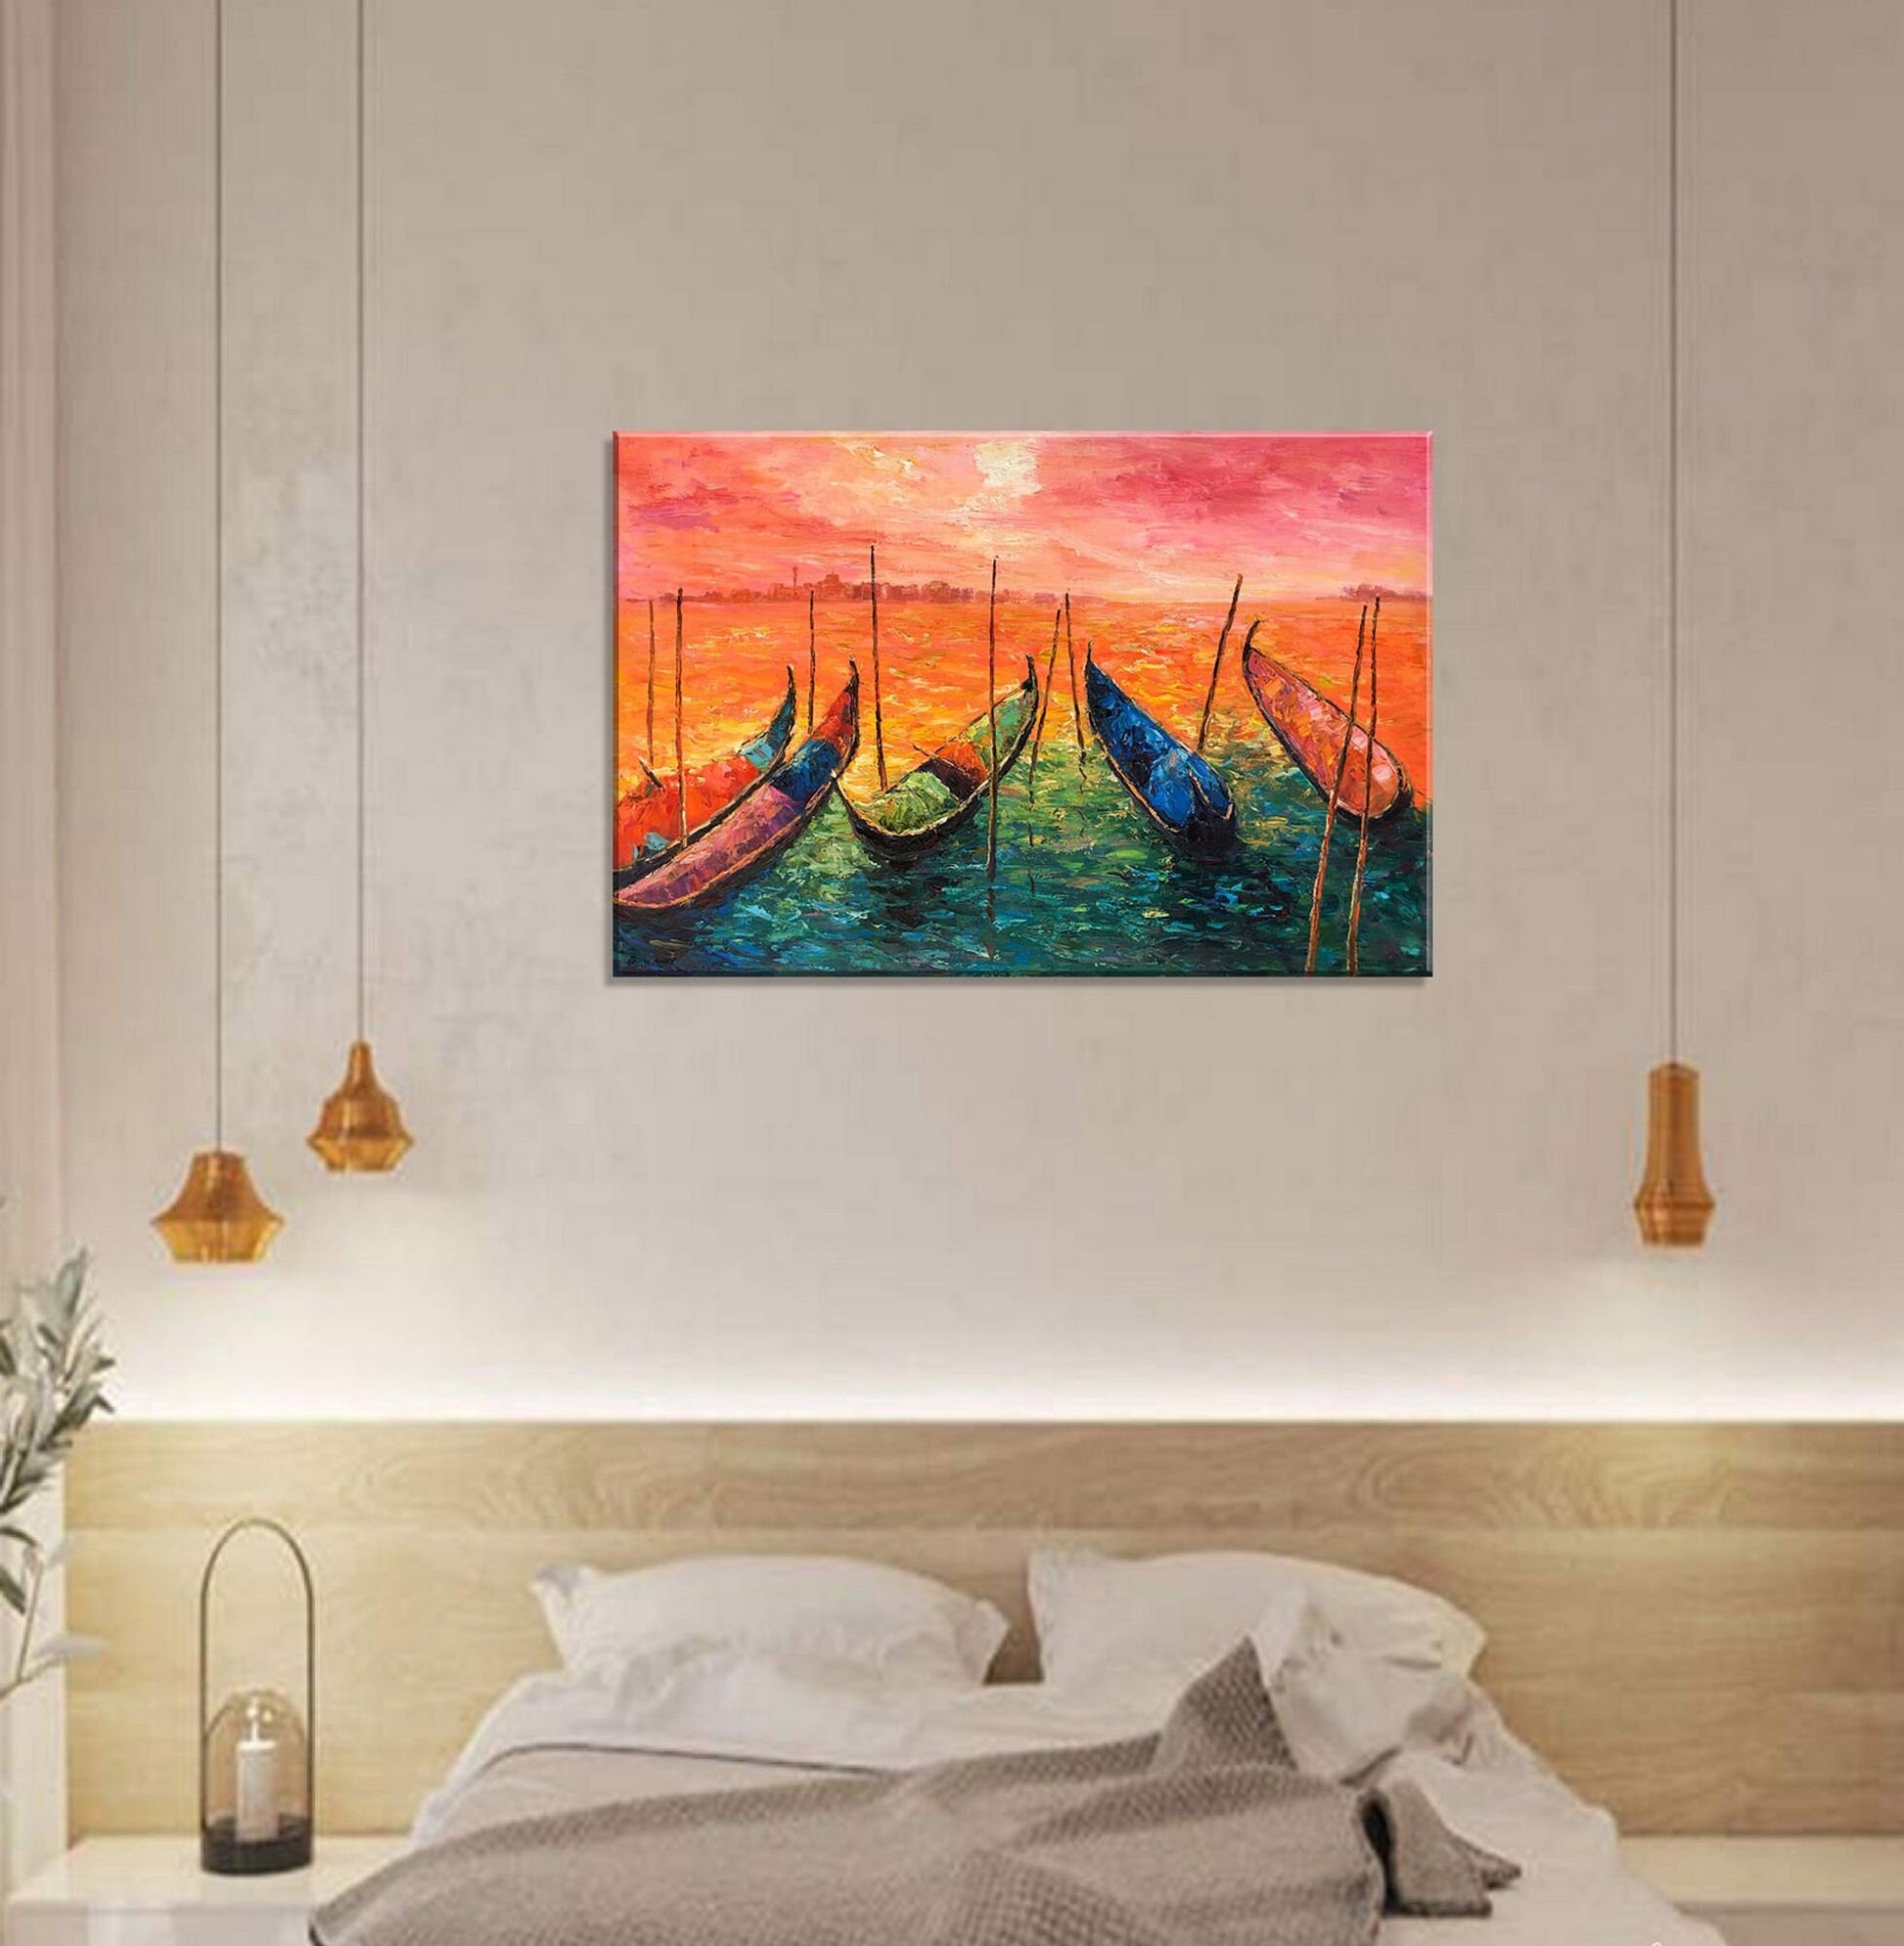 Venice At Dawn Grand Canal Gondola | Original Oil Painting for Contemporary Wall Decor